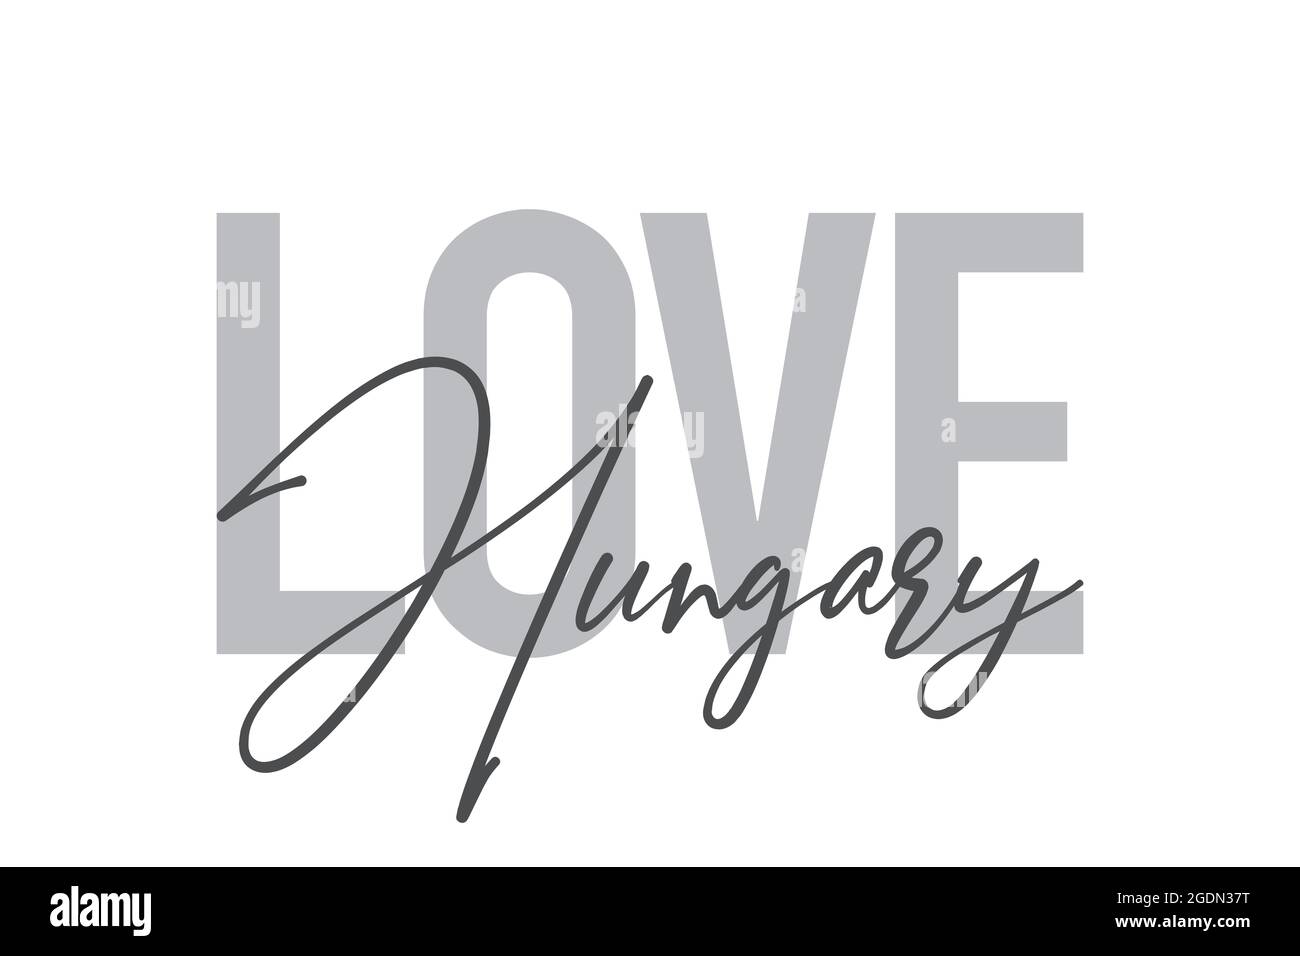 Modern, simple, minimal typographic design of a saying 'Love Hungary' in tones of grey color. Cool, urban, trendy and playful graphic vector art with Stock Photo